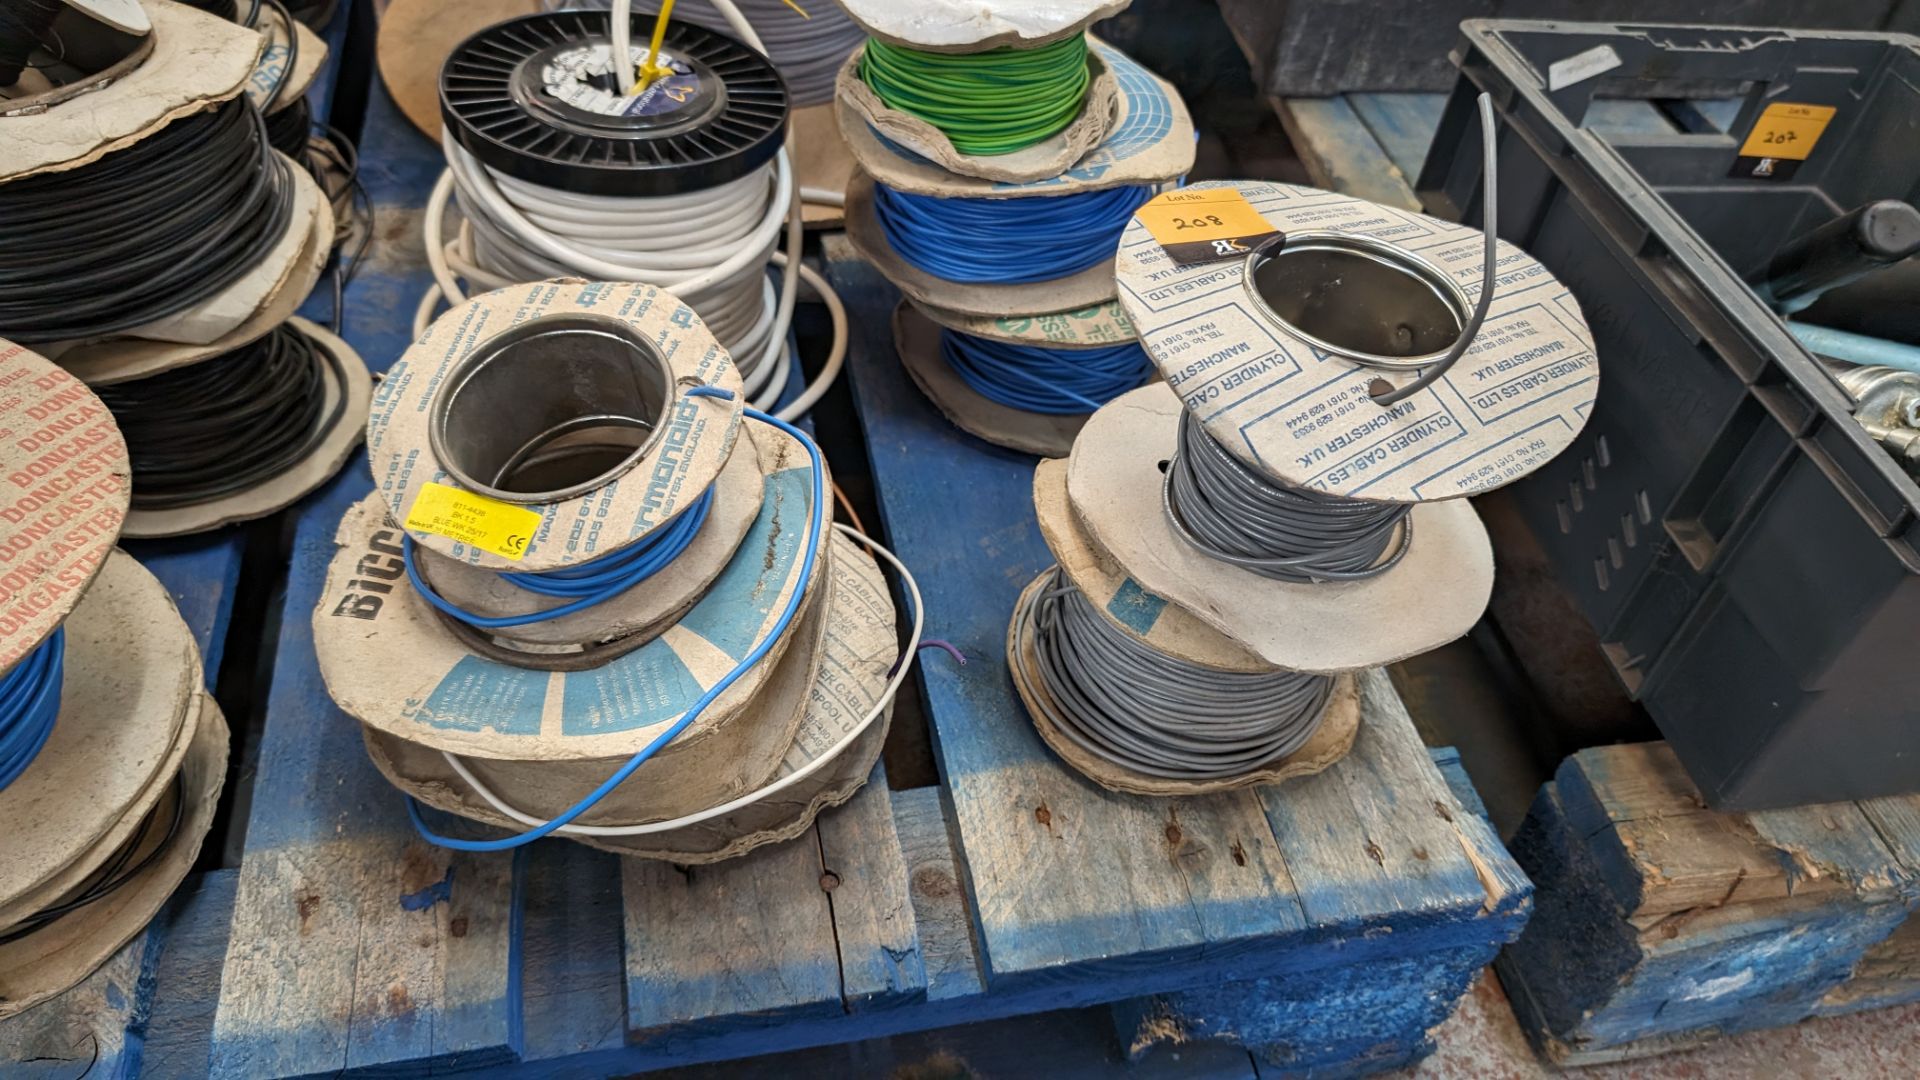 The contents of a pallet of electrical cable - Image 3 of 12